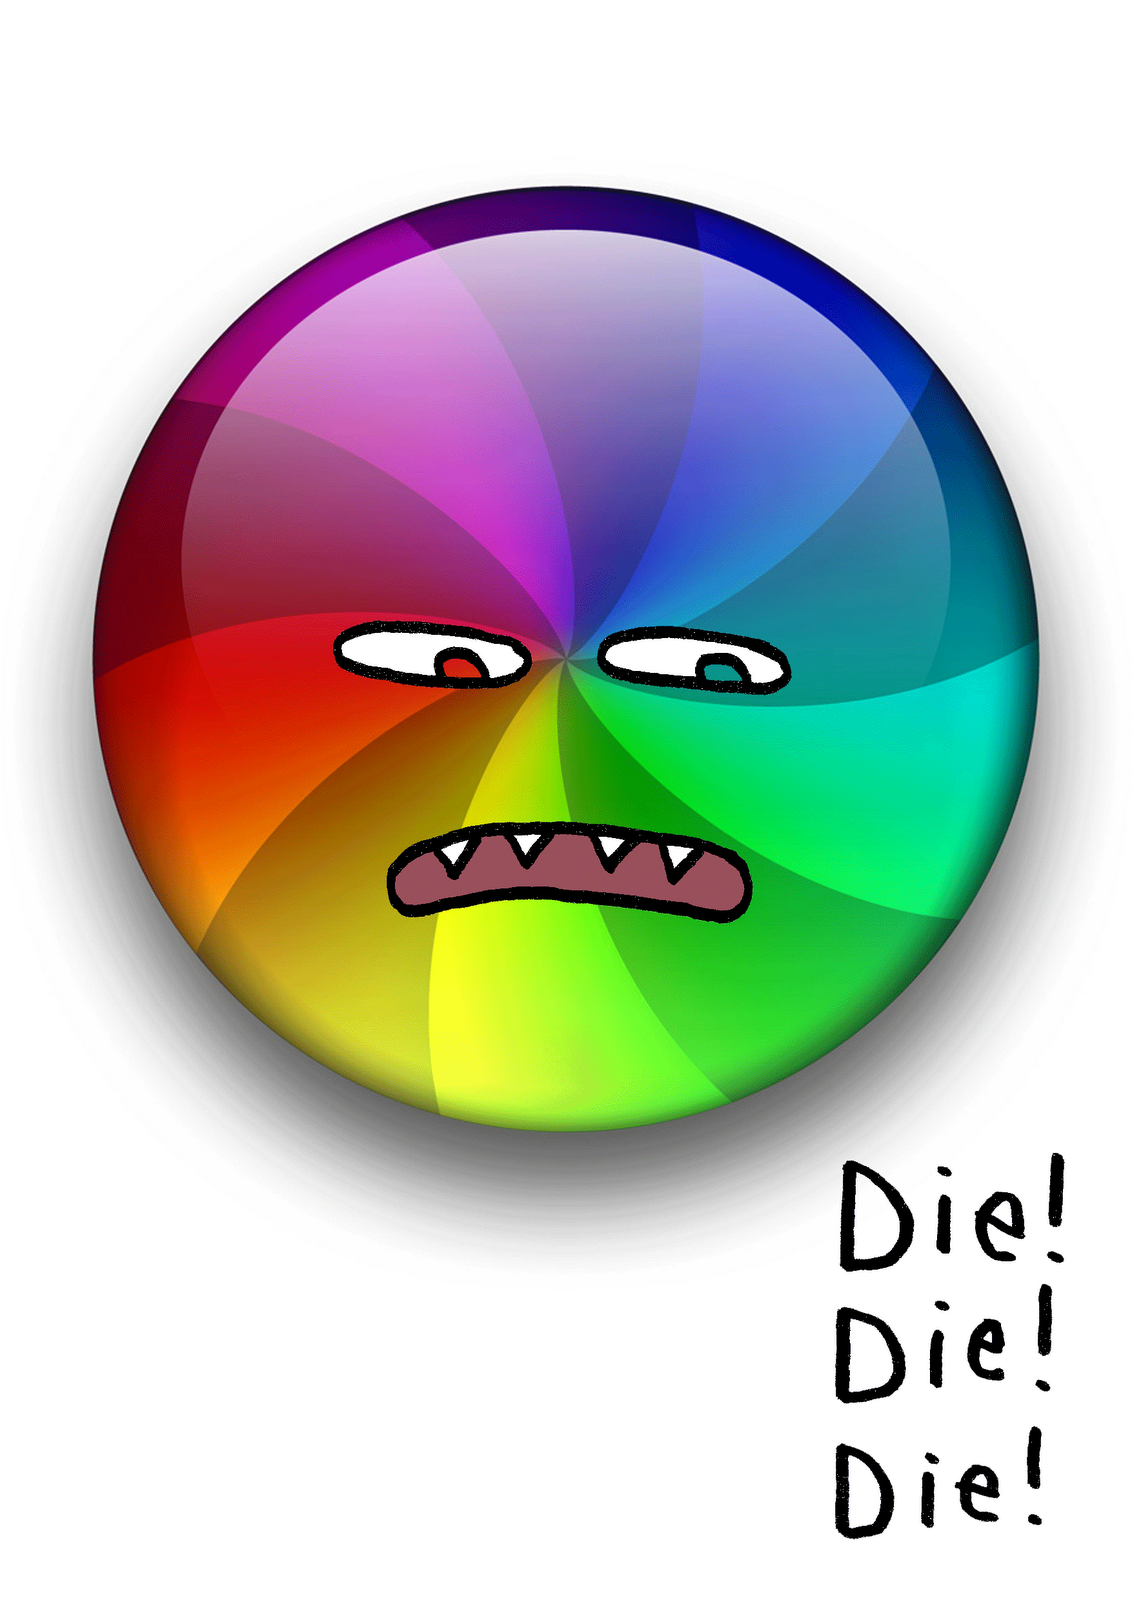 mac spinning wheel of death all the time